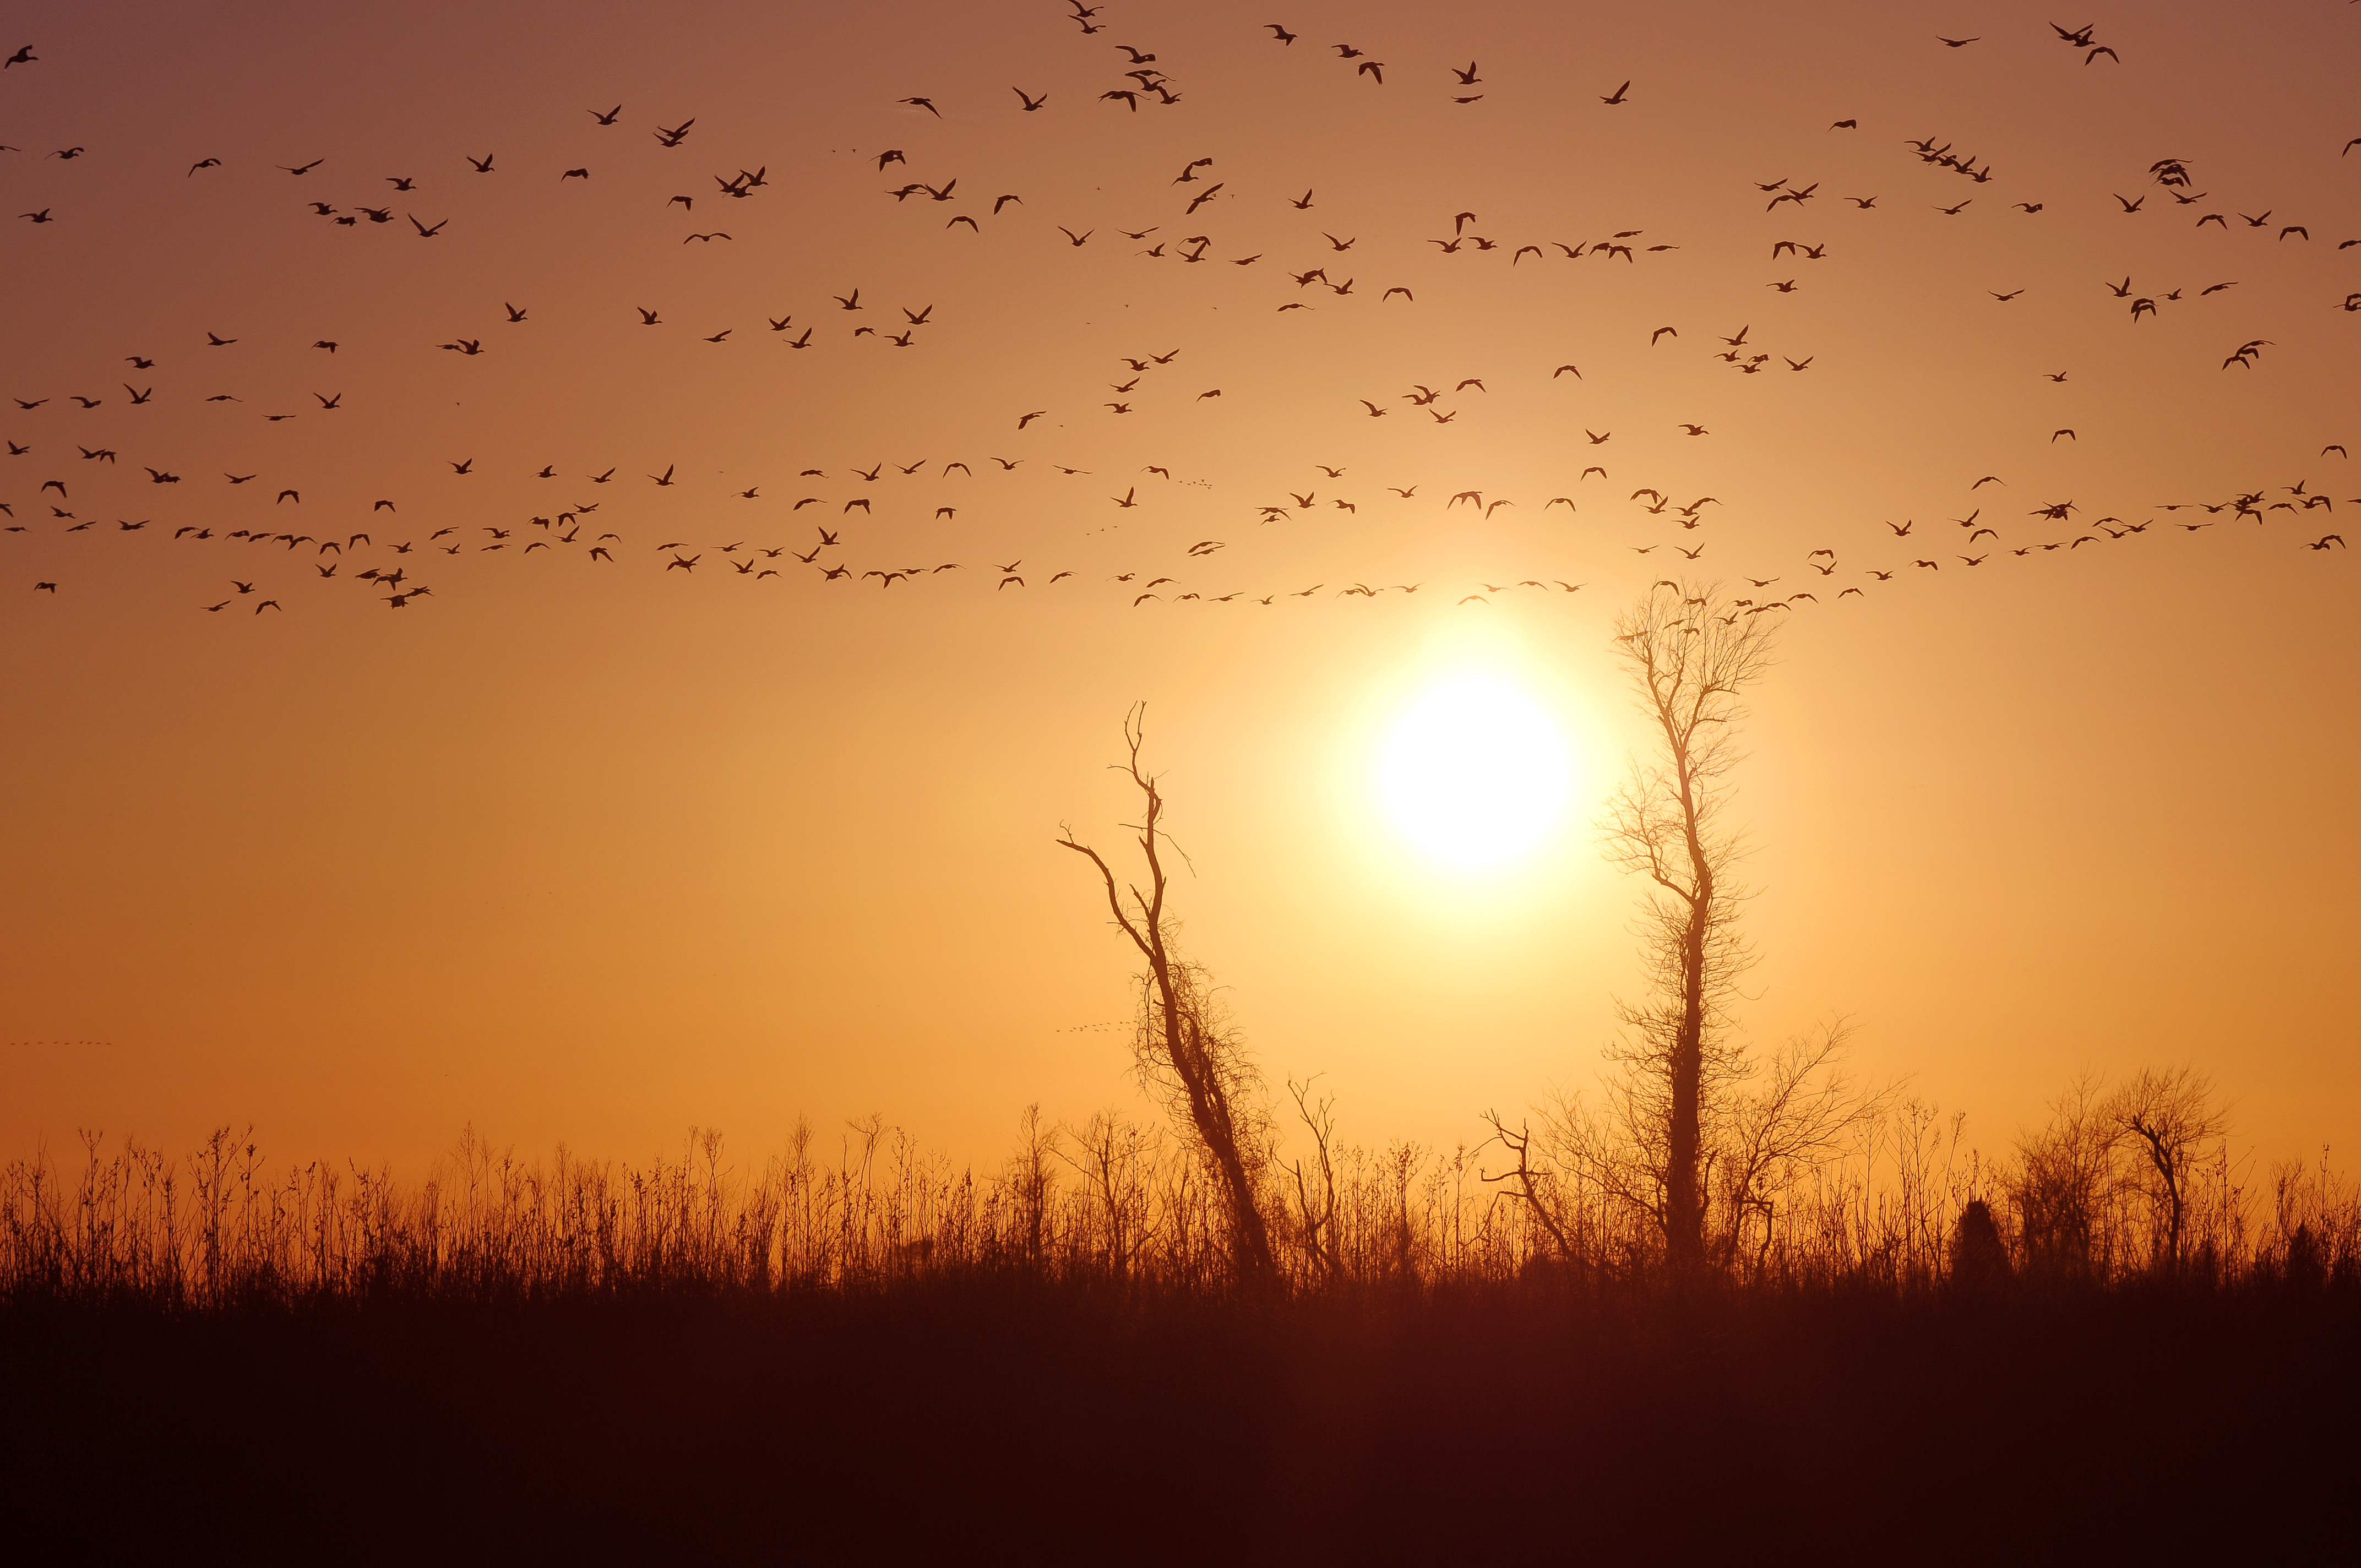 Ducks and geese are expecially active at sunrise and sunset during the winter months.